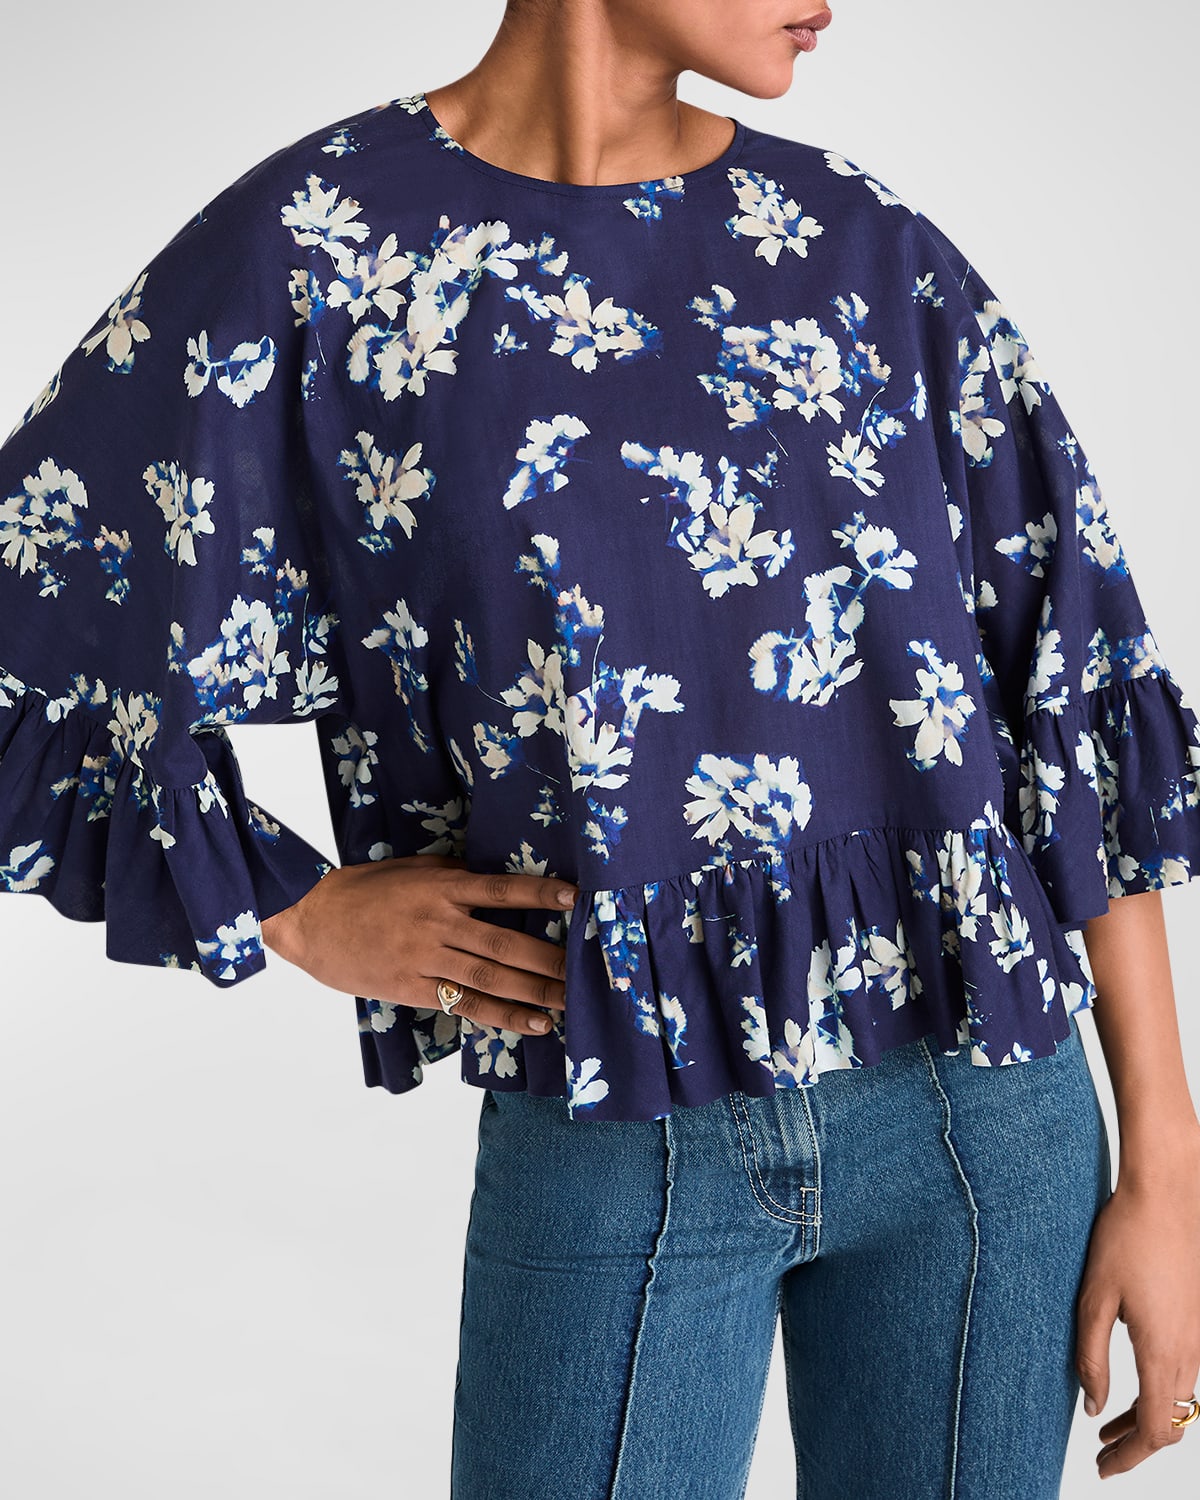 Astral Floral-Print Ruffle Top